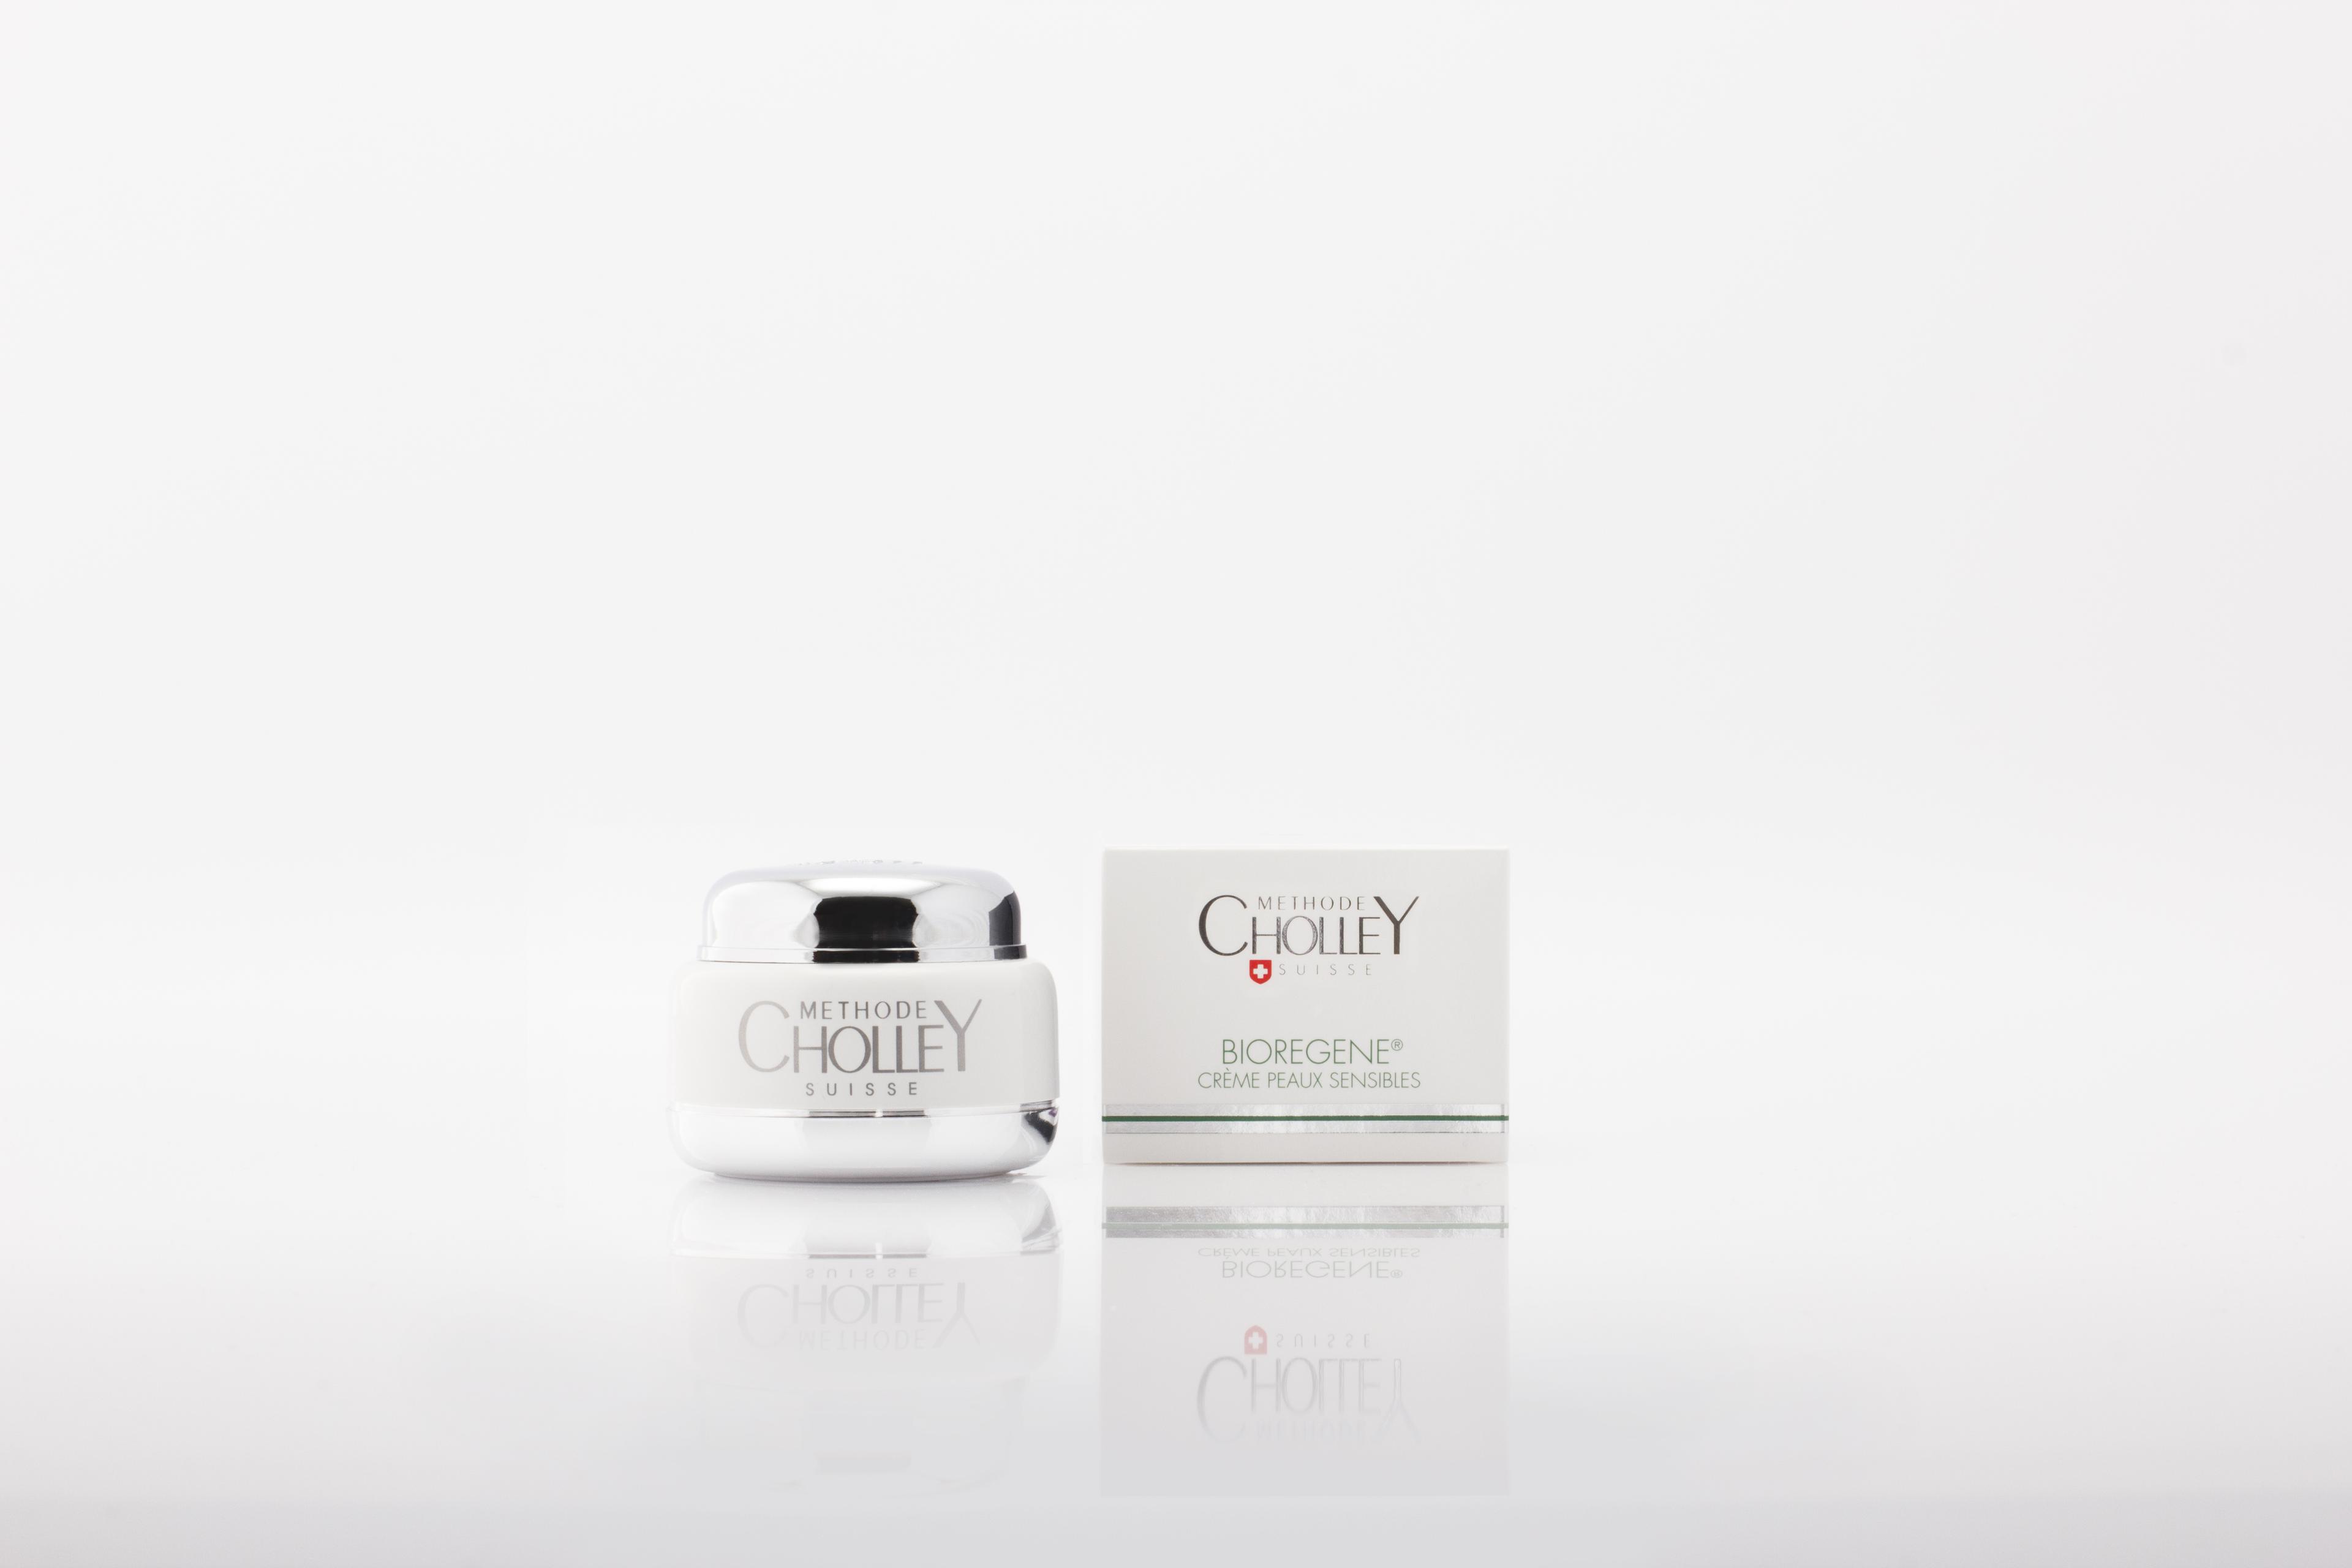 Product: 3 Features of Skin Replenishing CHOLLEY Crème Peaux Sensibles